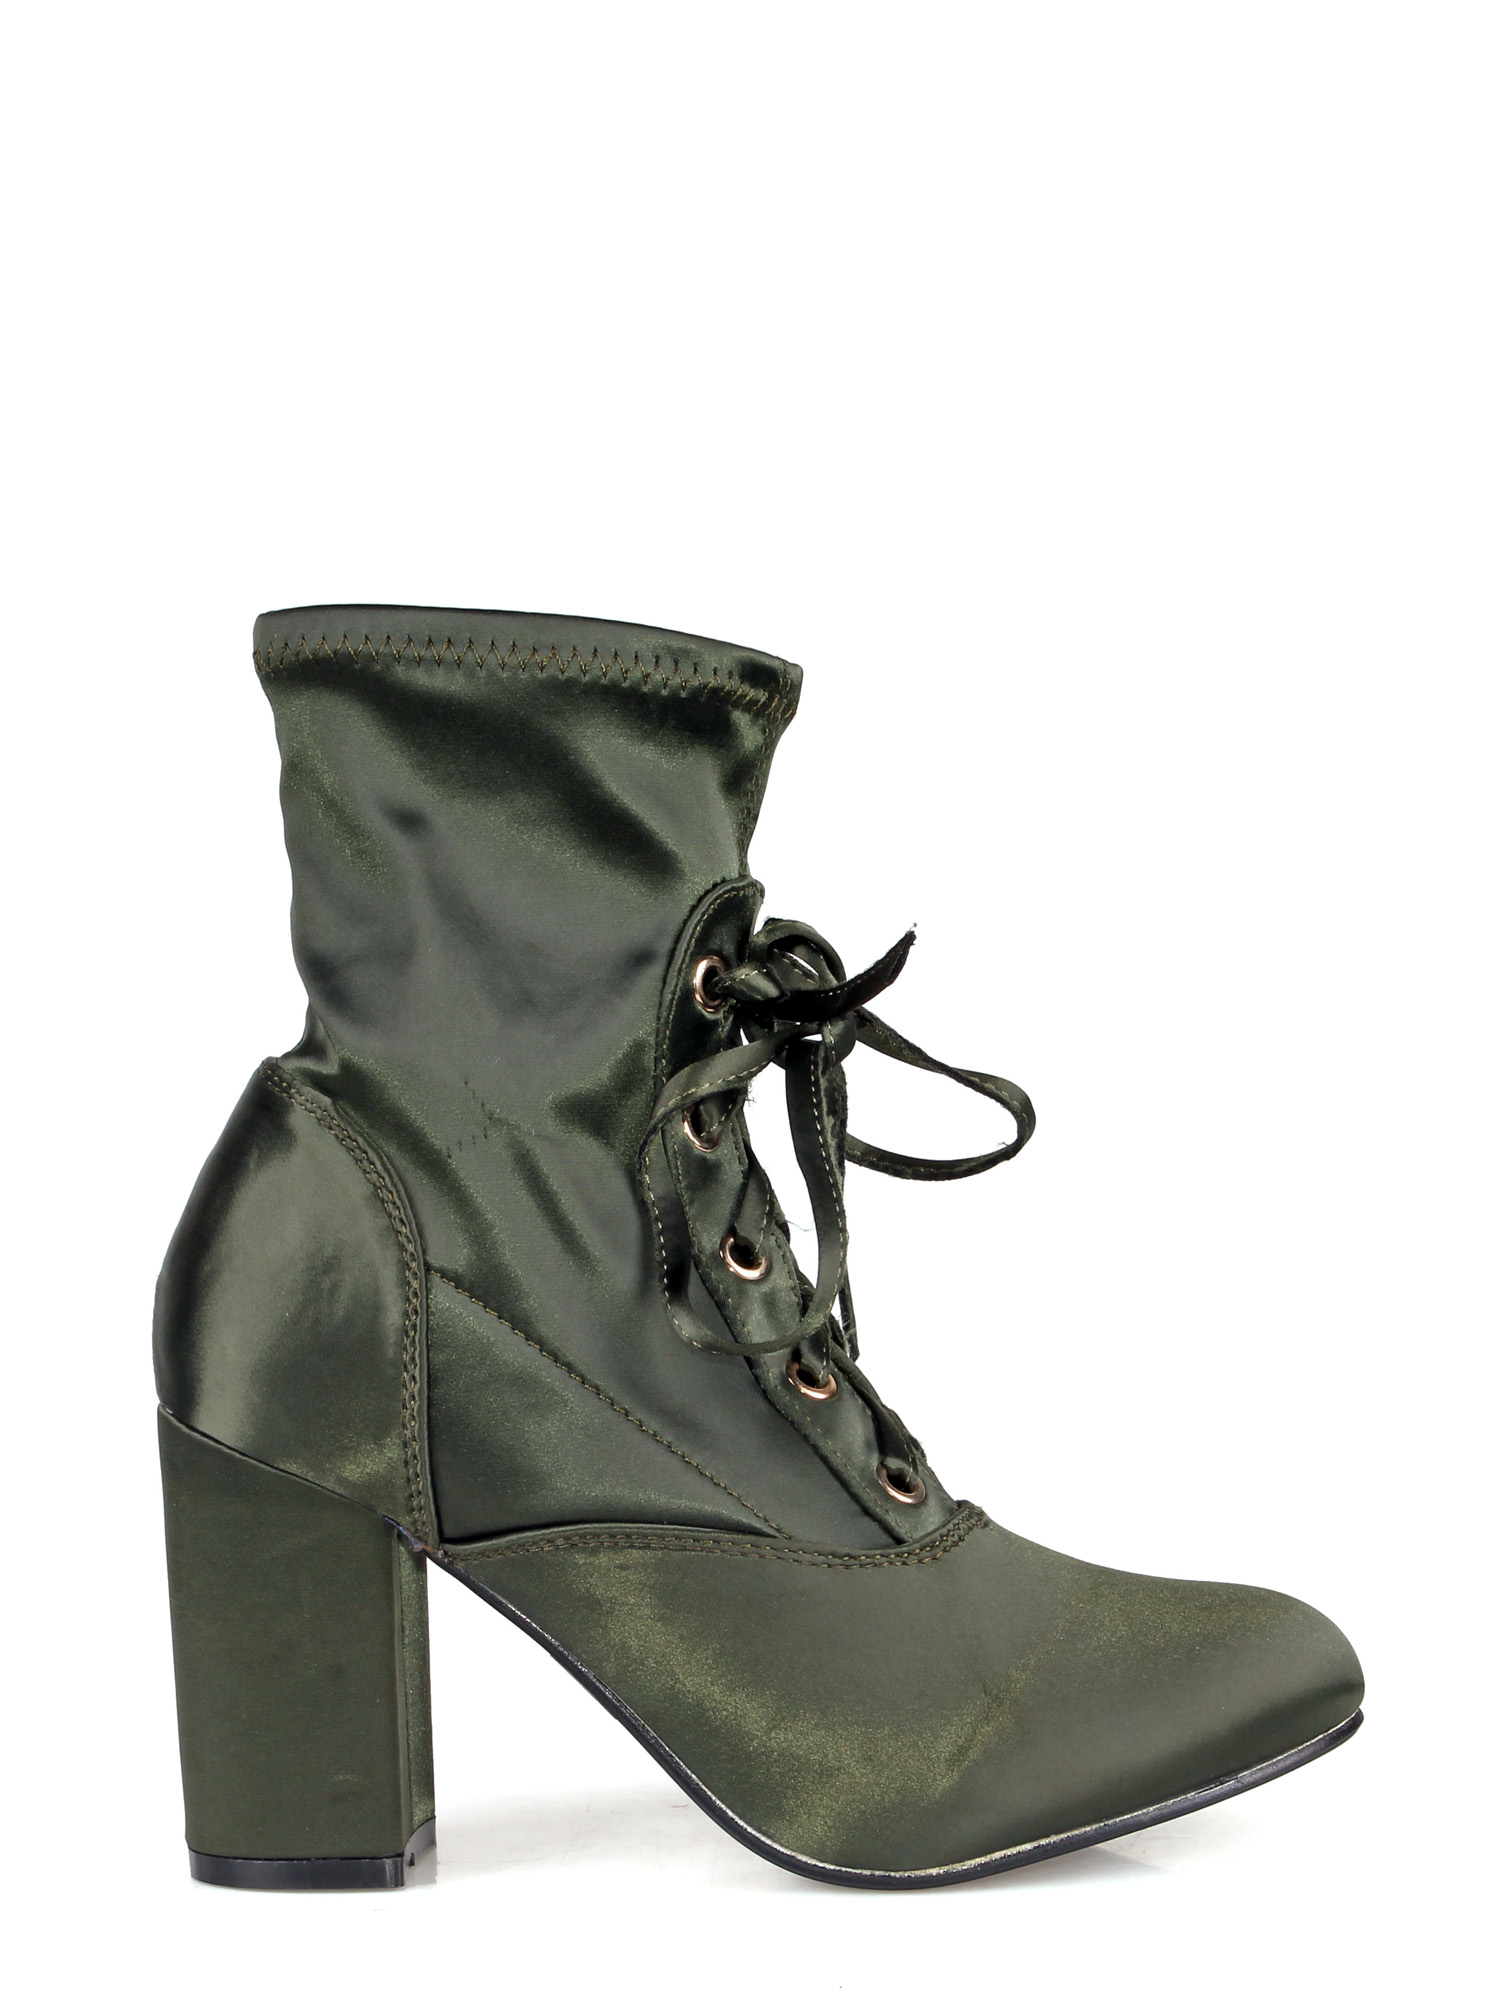 Nature Breeze Lace up Almond Toe Chunk Heel Women's Anke Boots in Olive - image 1 of 4